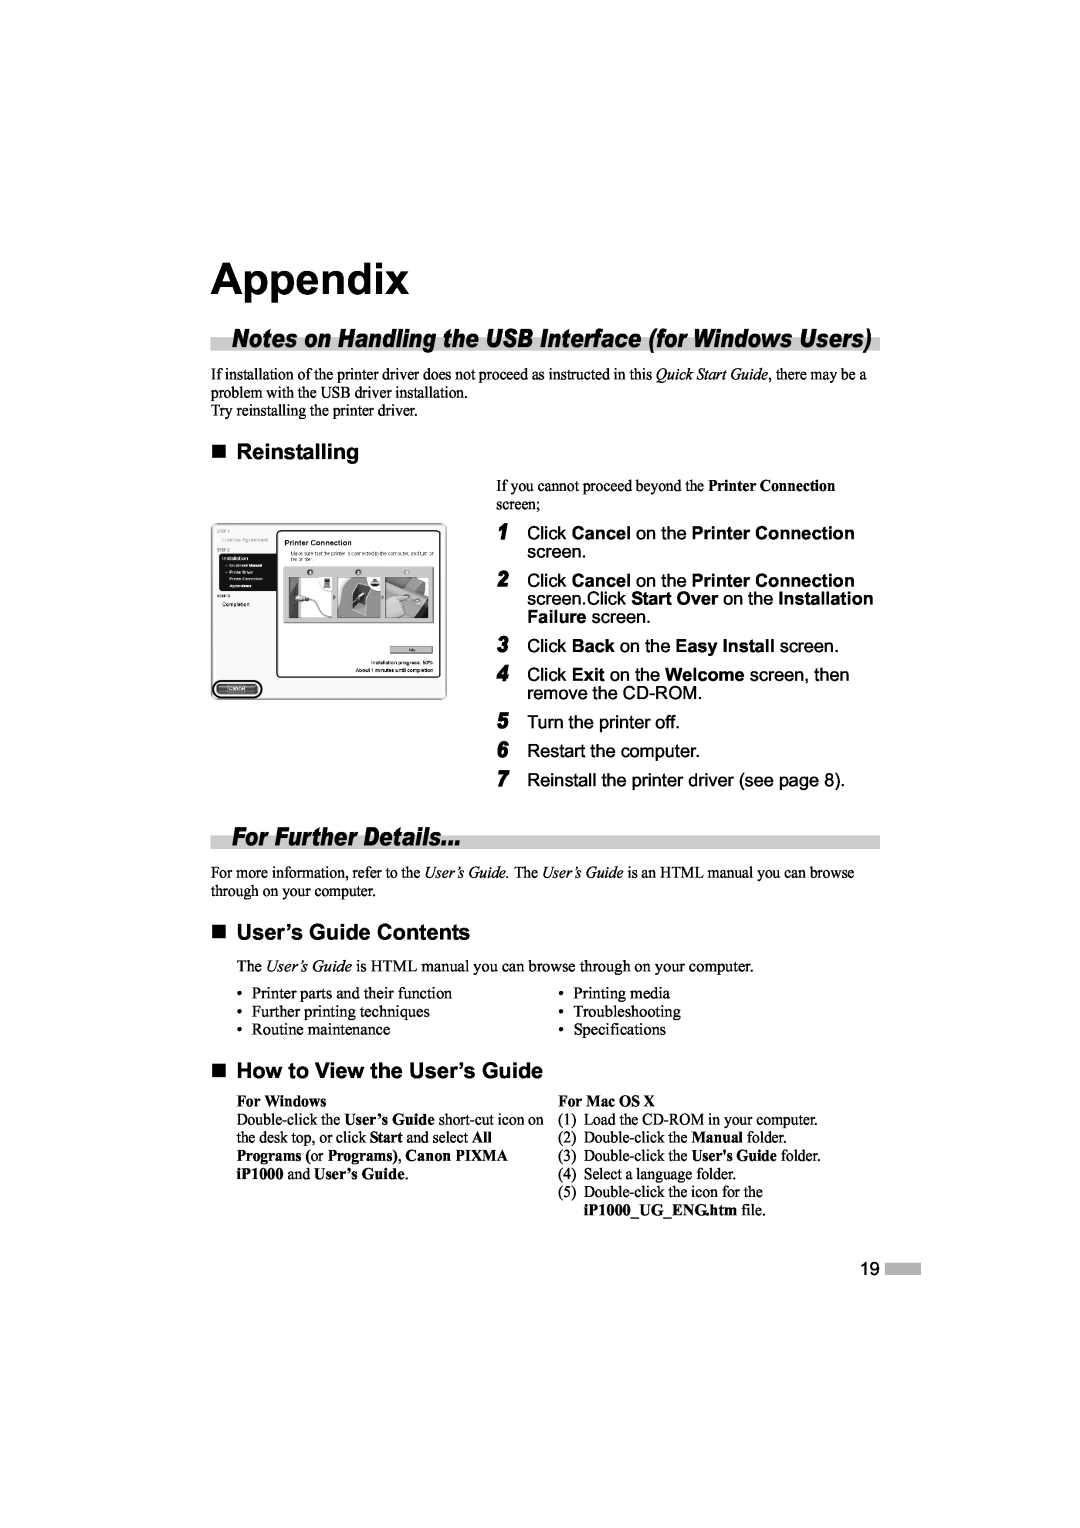 Canon IP1000 Appendix, For Further Details, „ Reinstalling, „ User’s Guide Contents, „ How to View the User’s Guide 